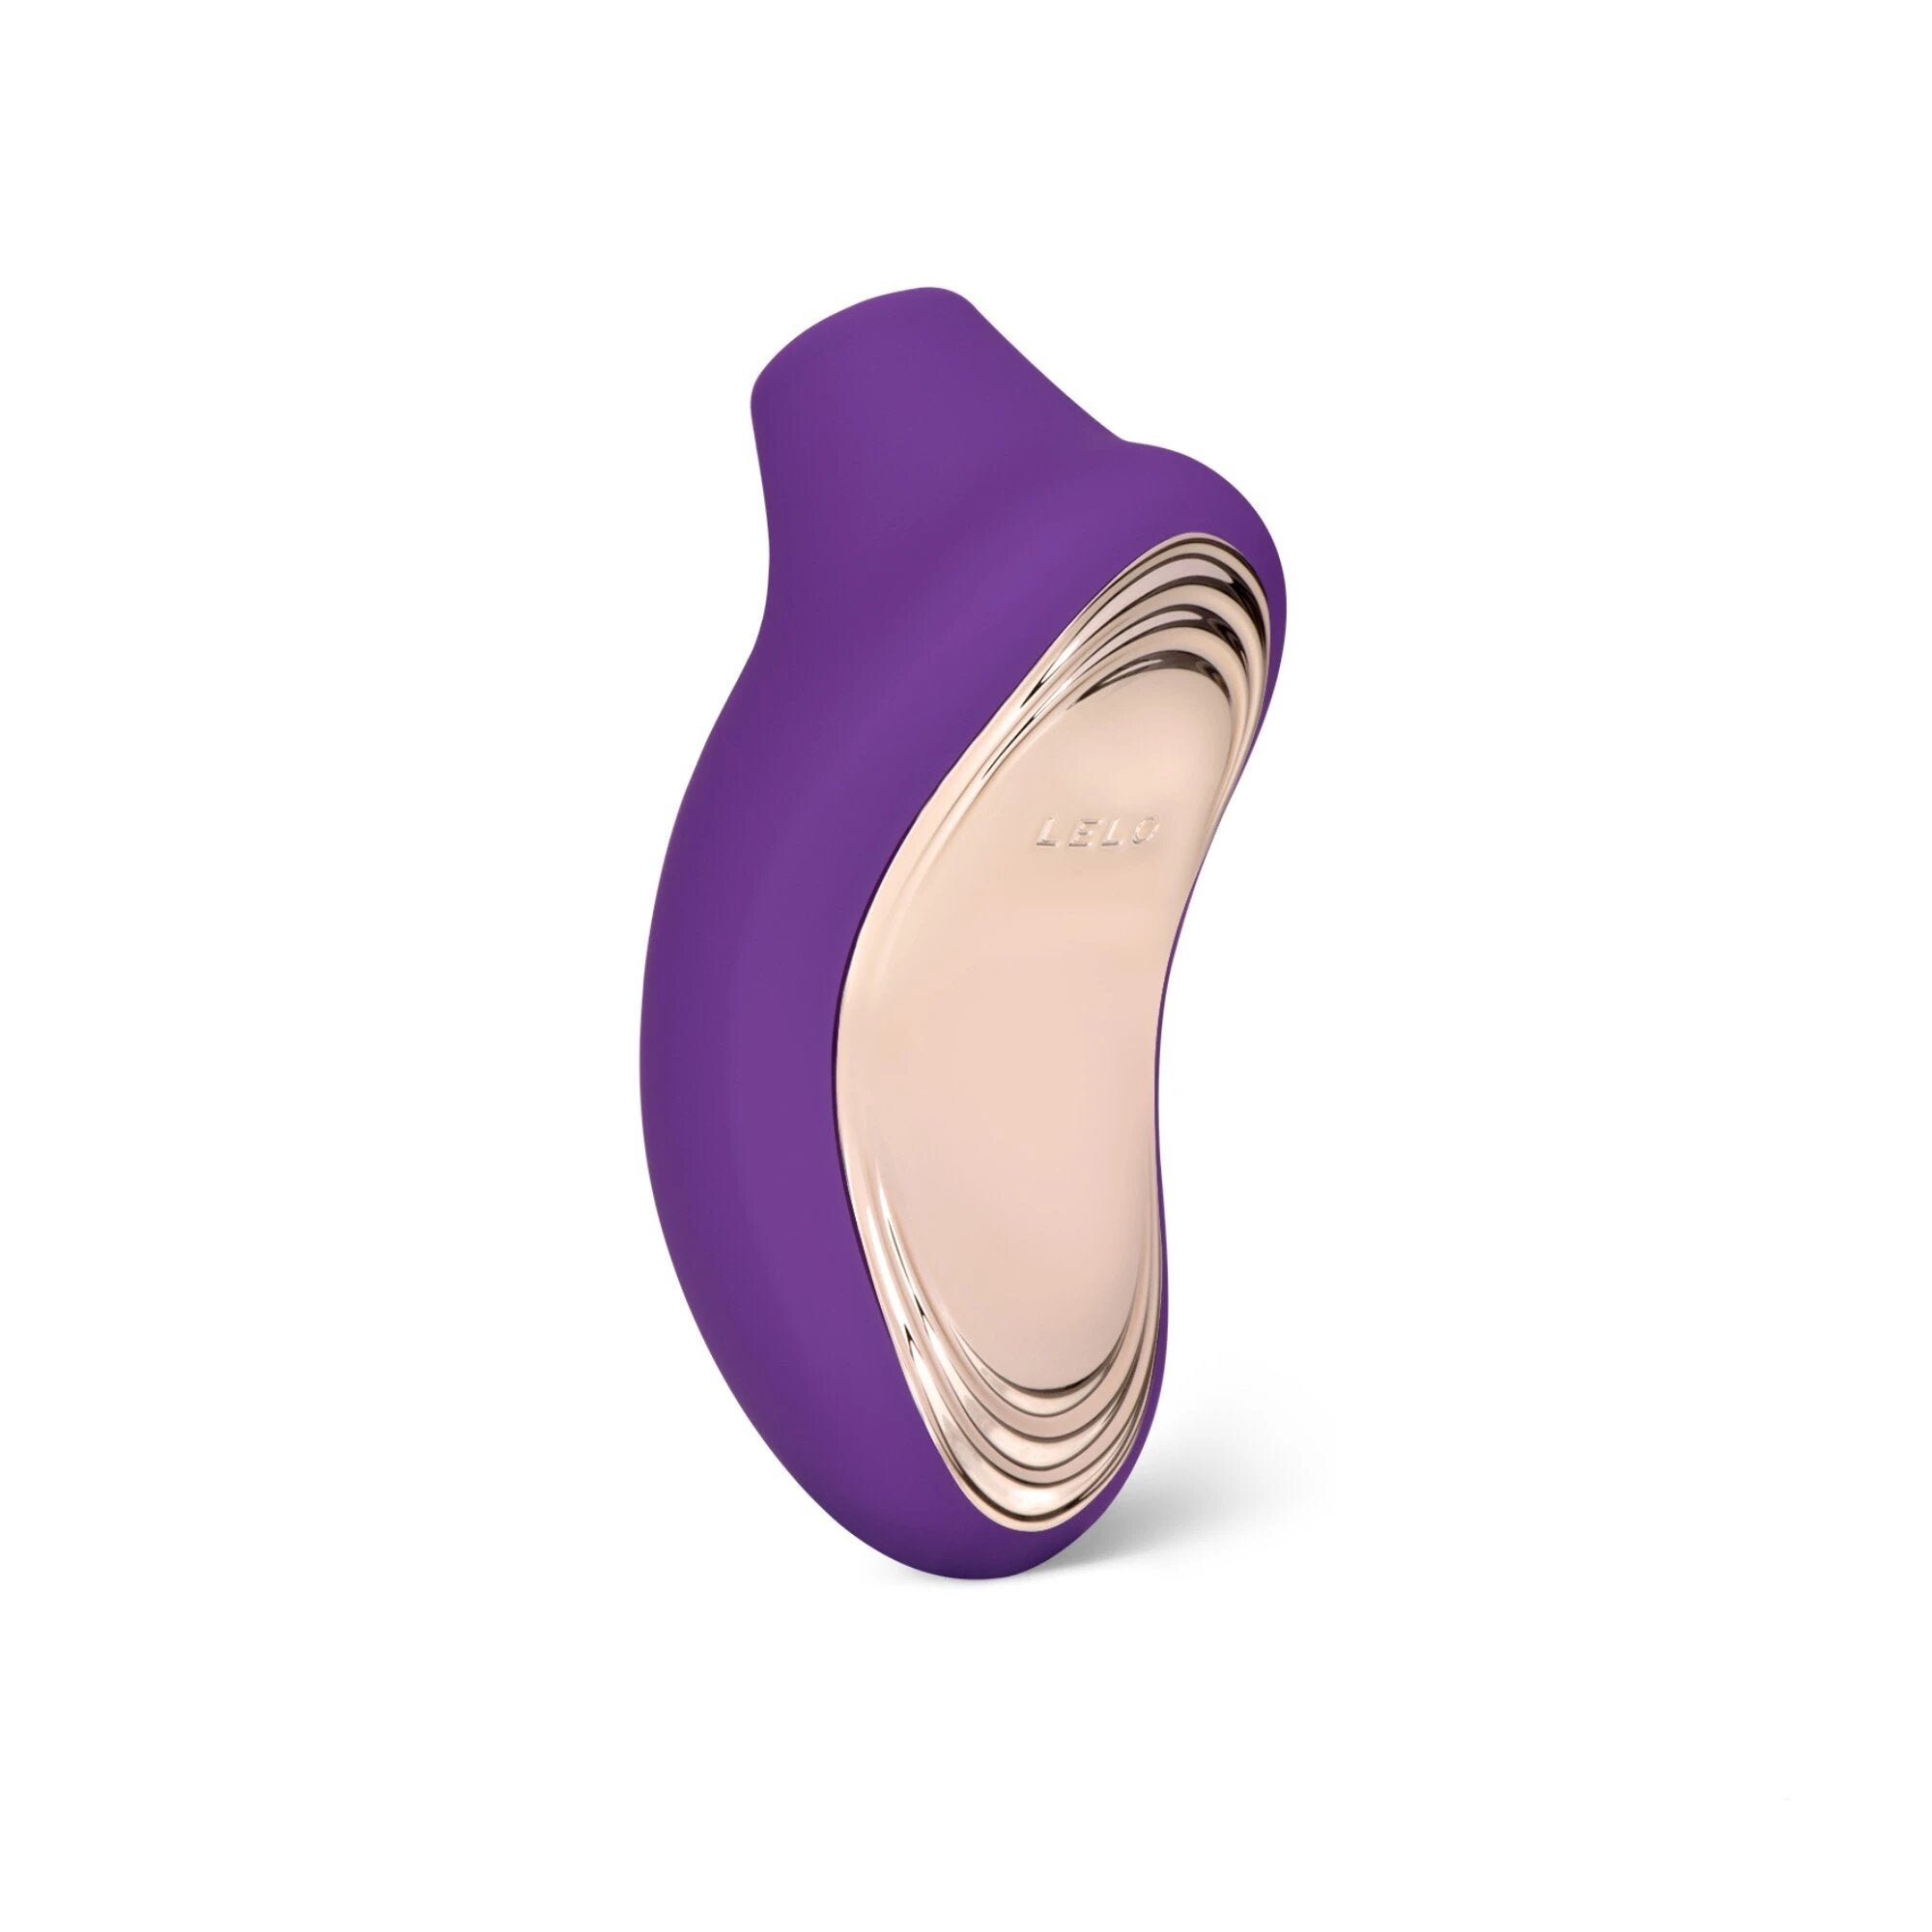 LELO Is Celebrating Masturbation May In The Best Way (Hint: It’s A Sale)